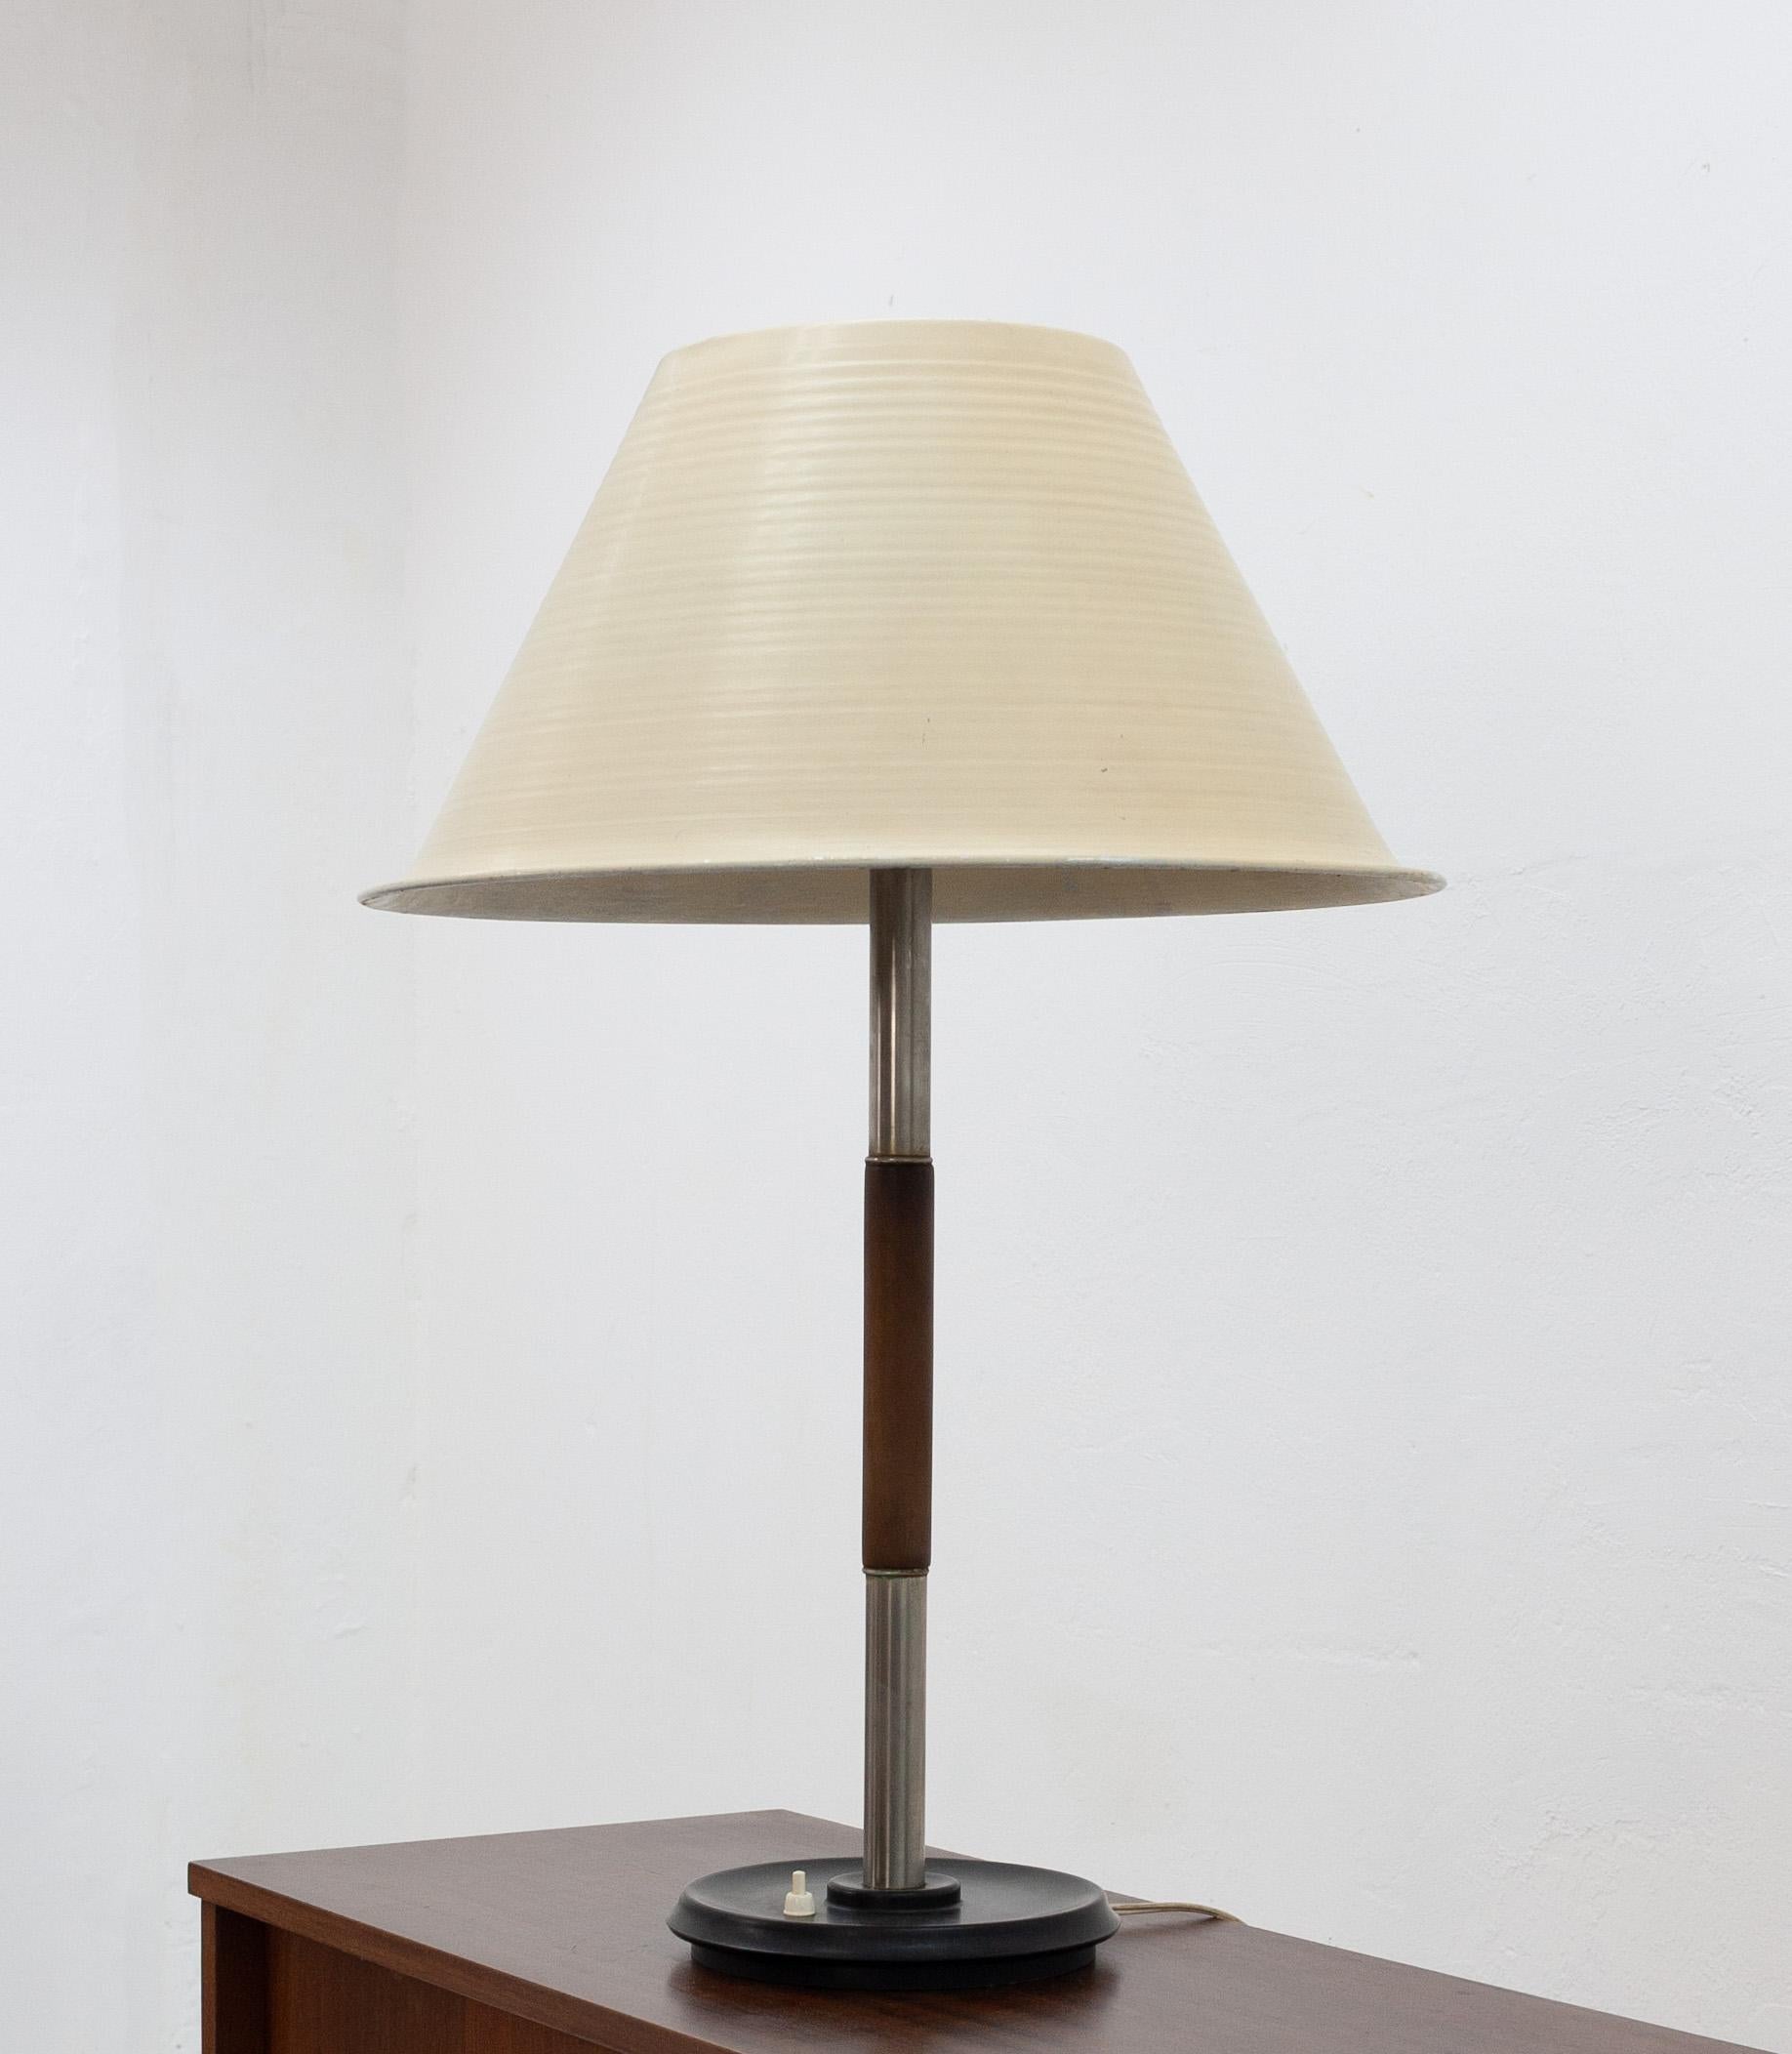 Very rare find this table light by W.H. Gispen. Model Giso 5020, 1947. Features a round bakelite base with push switch, ridged aluminum lampshade and the original glass inner hood. Signed on base. All complete and original.